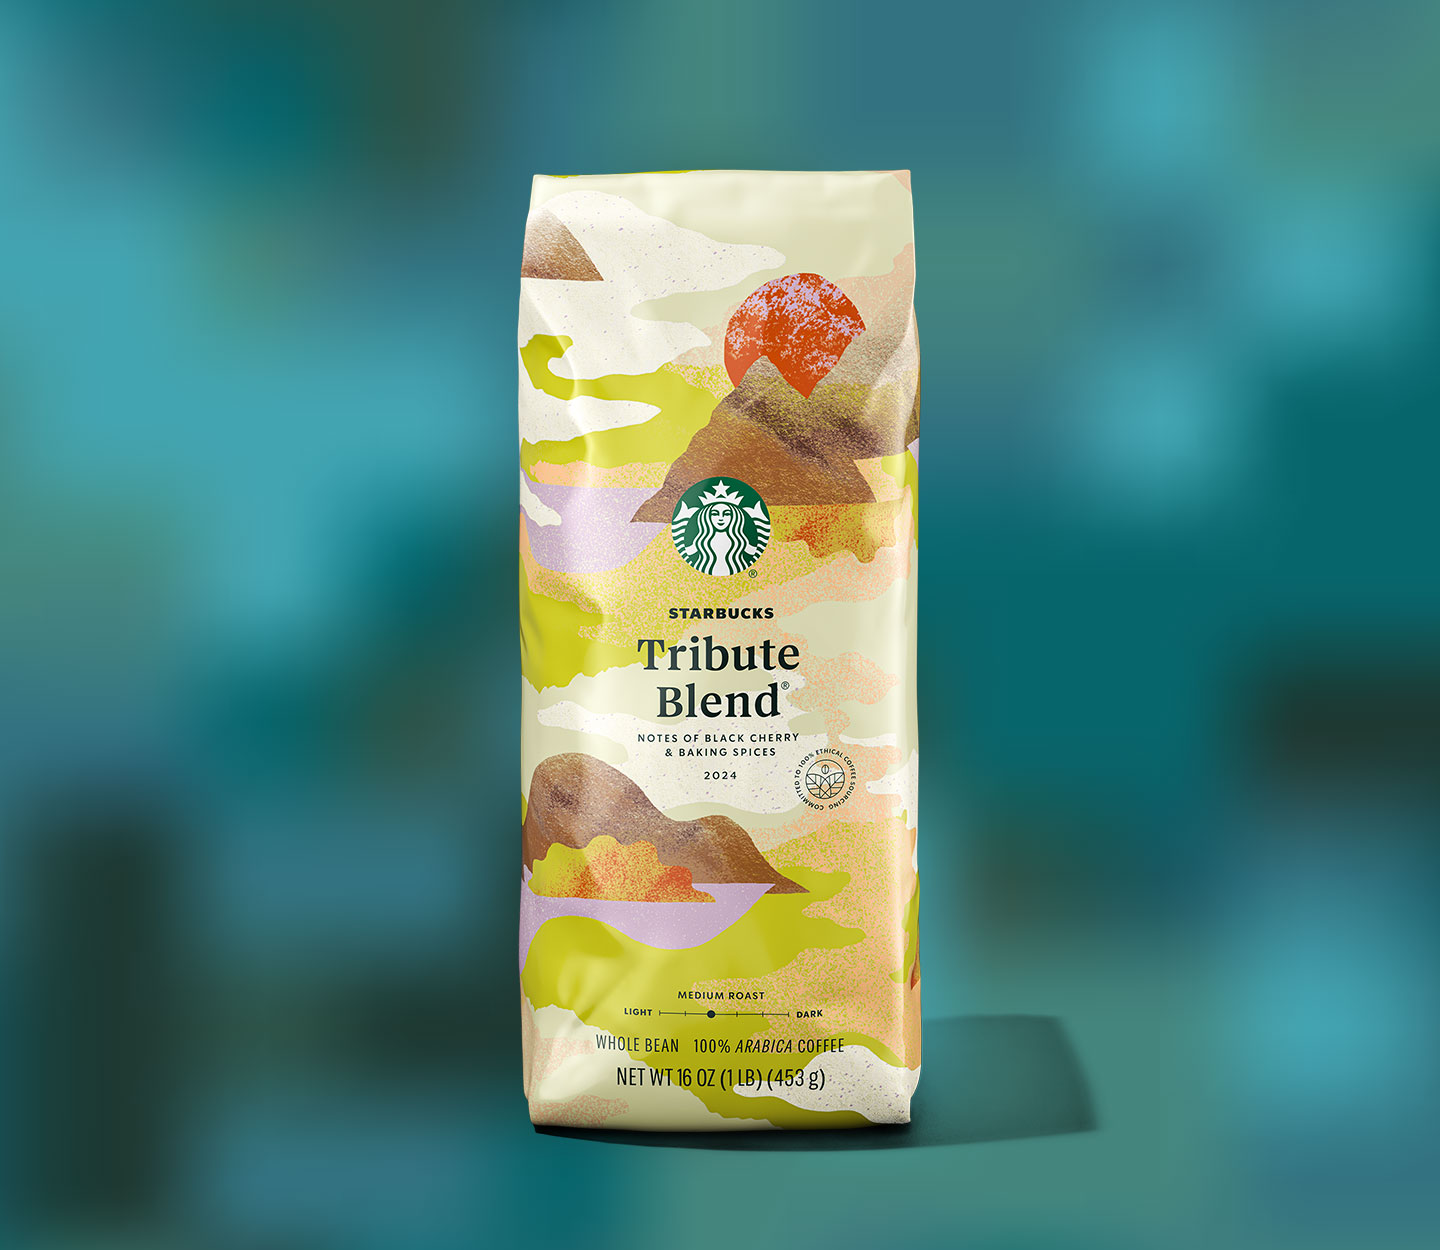 A bag of Starbucks Tribute Blend® coffee featuring an airy, mountainous illustration.